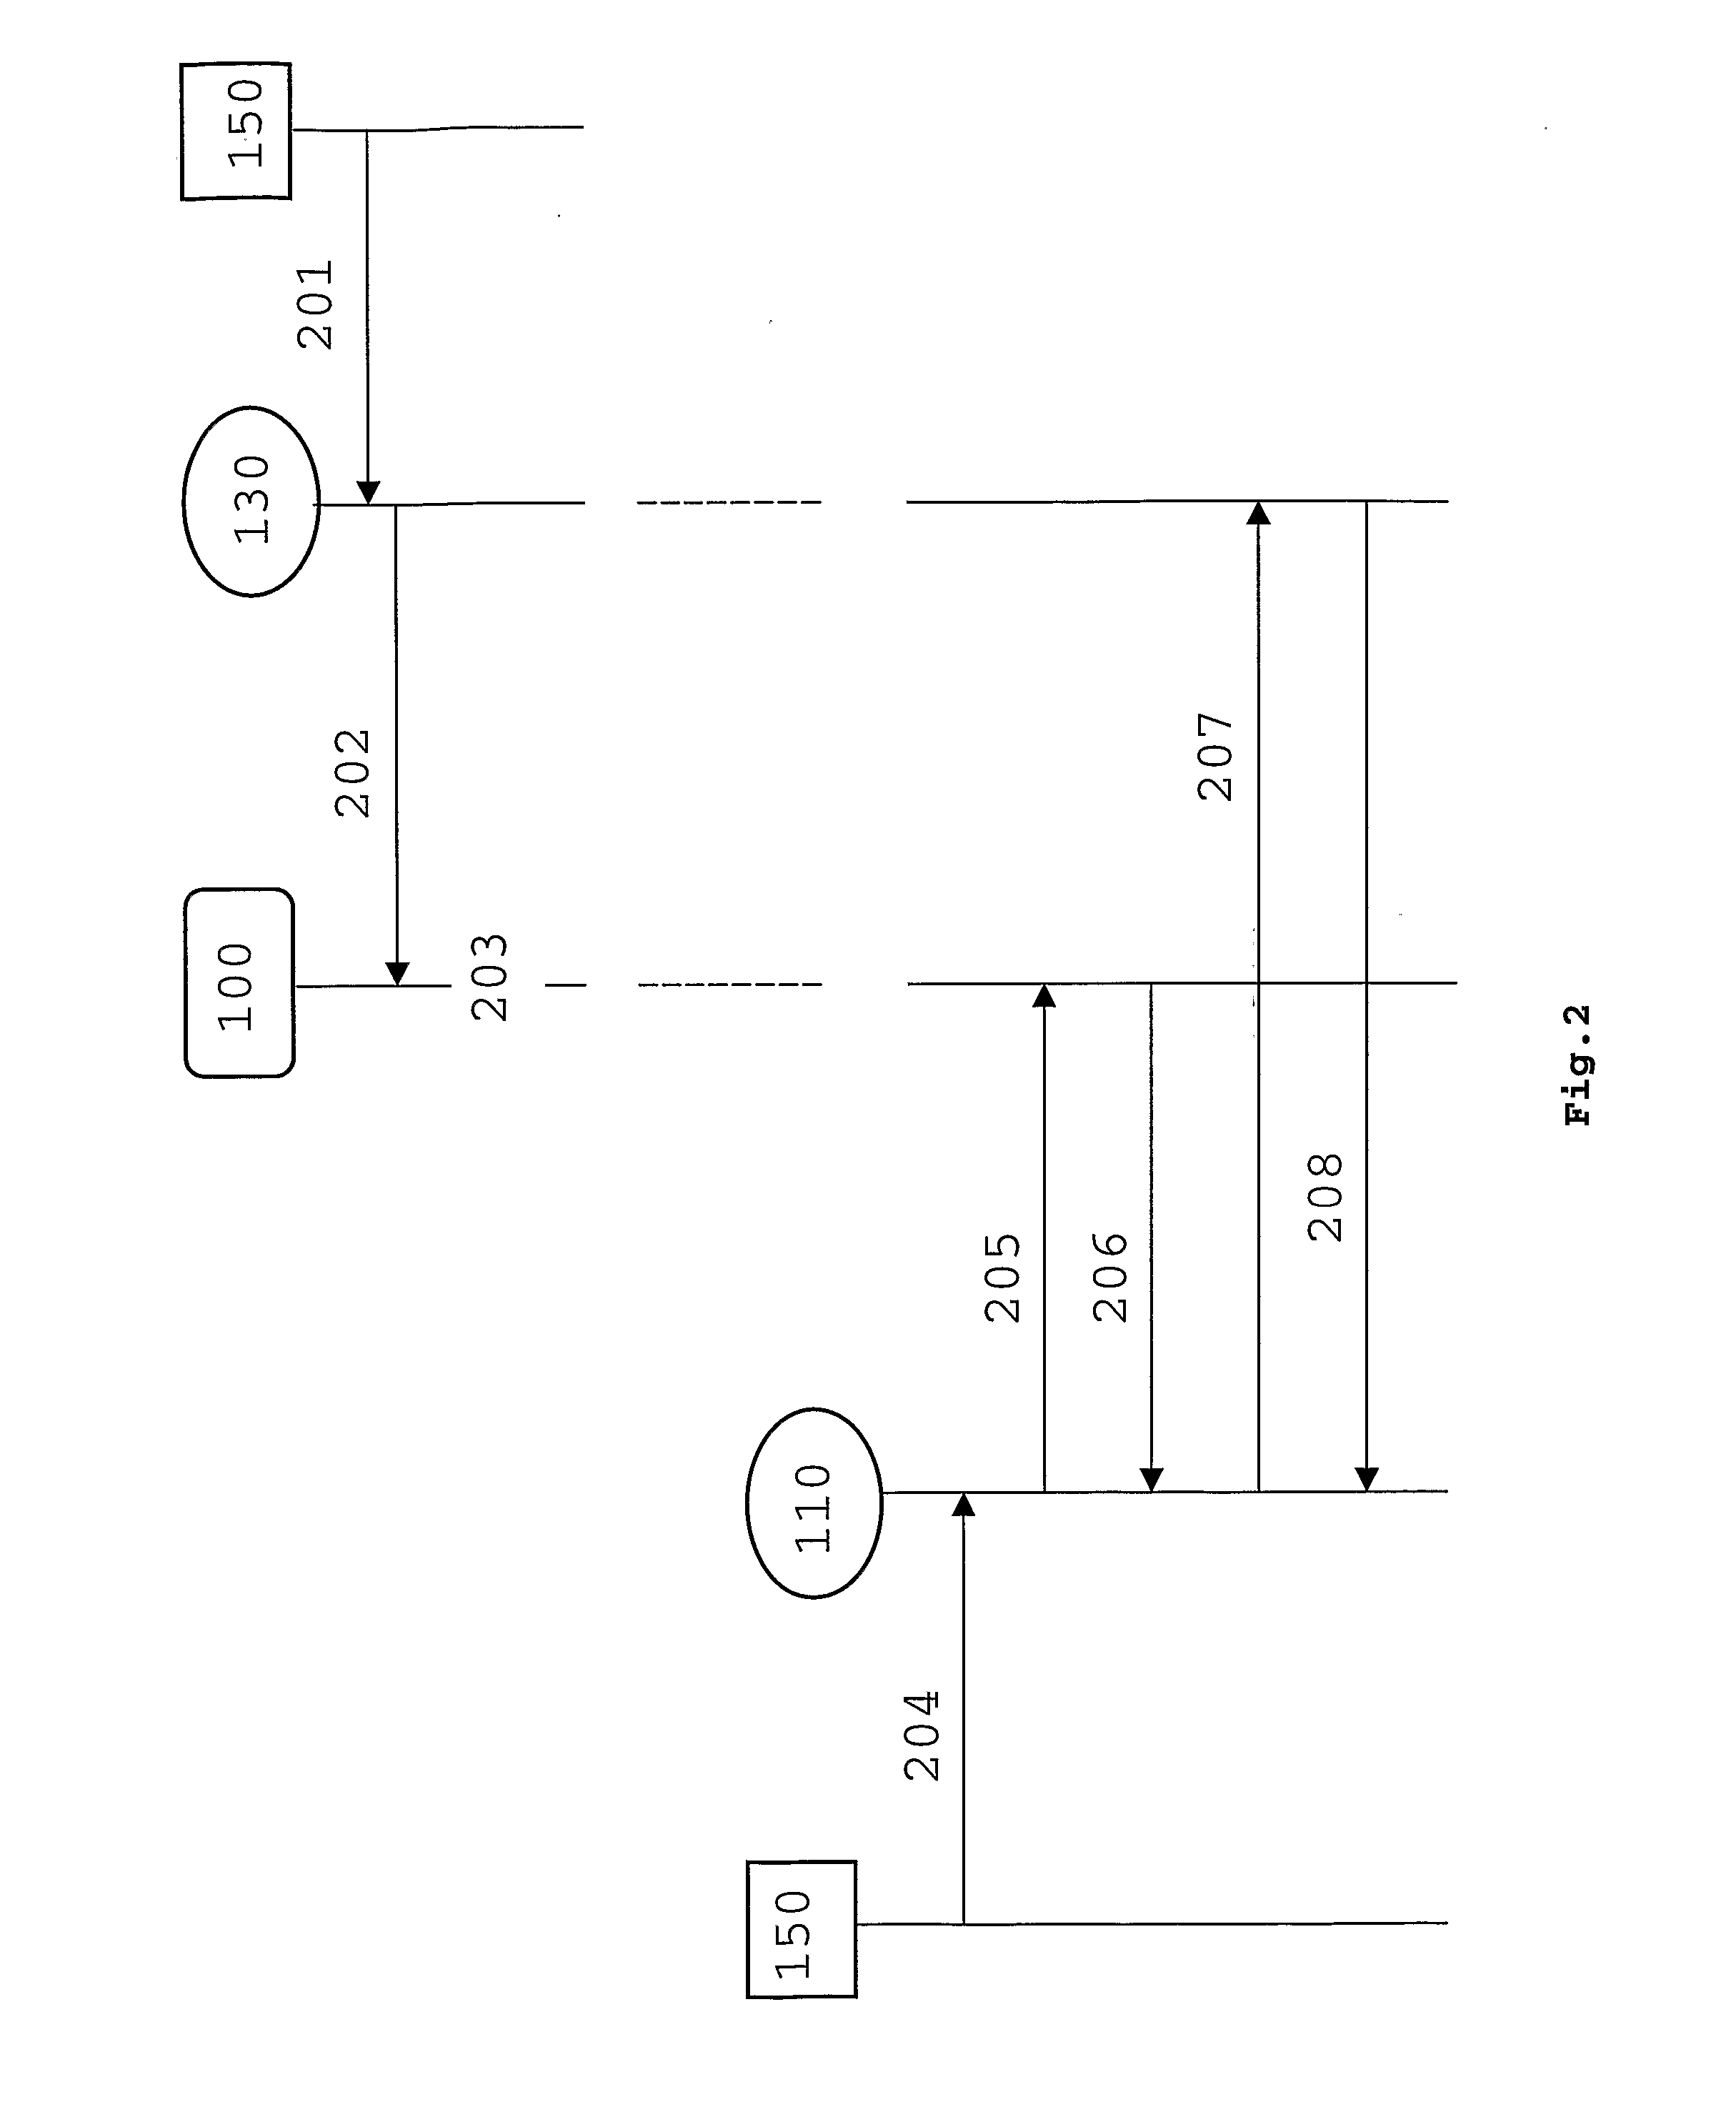 Method and Apparatus for Providing Access to an Identity Service